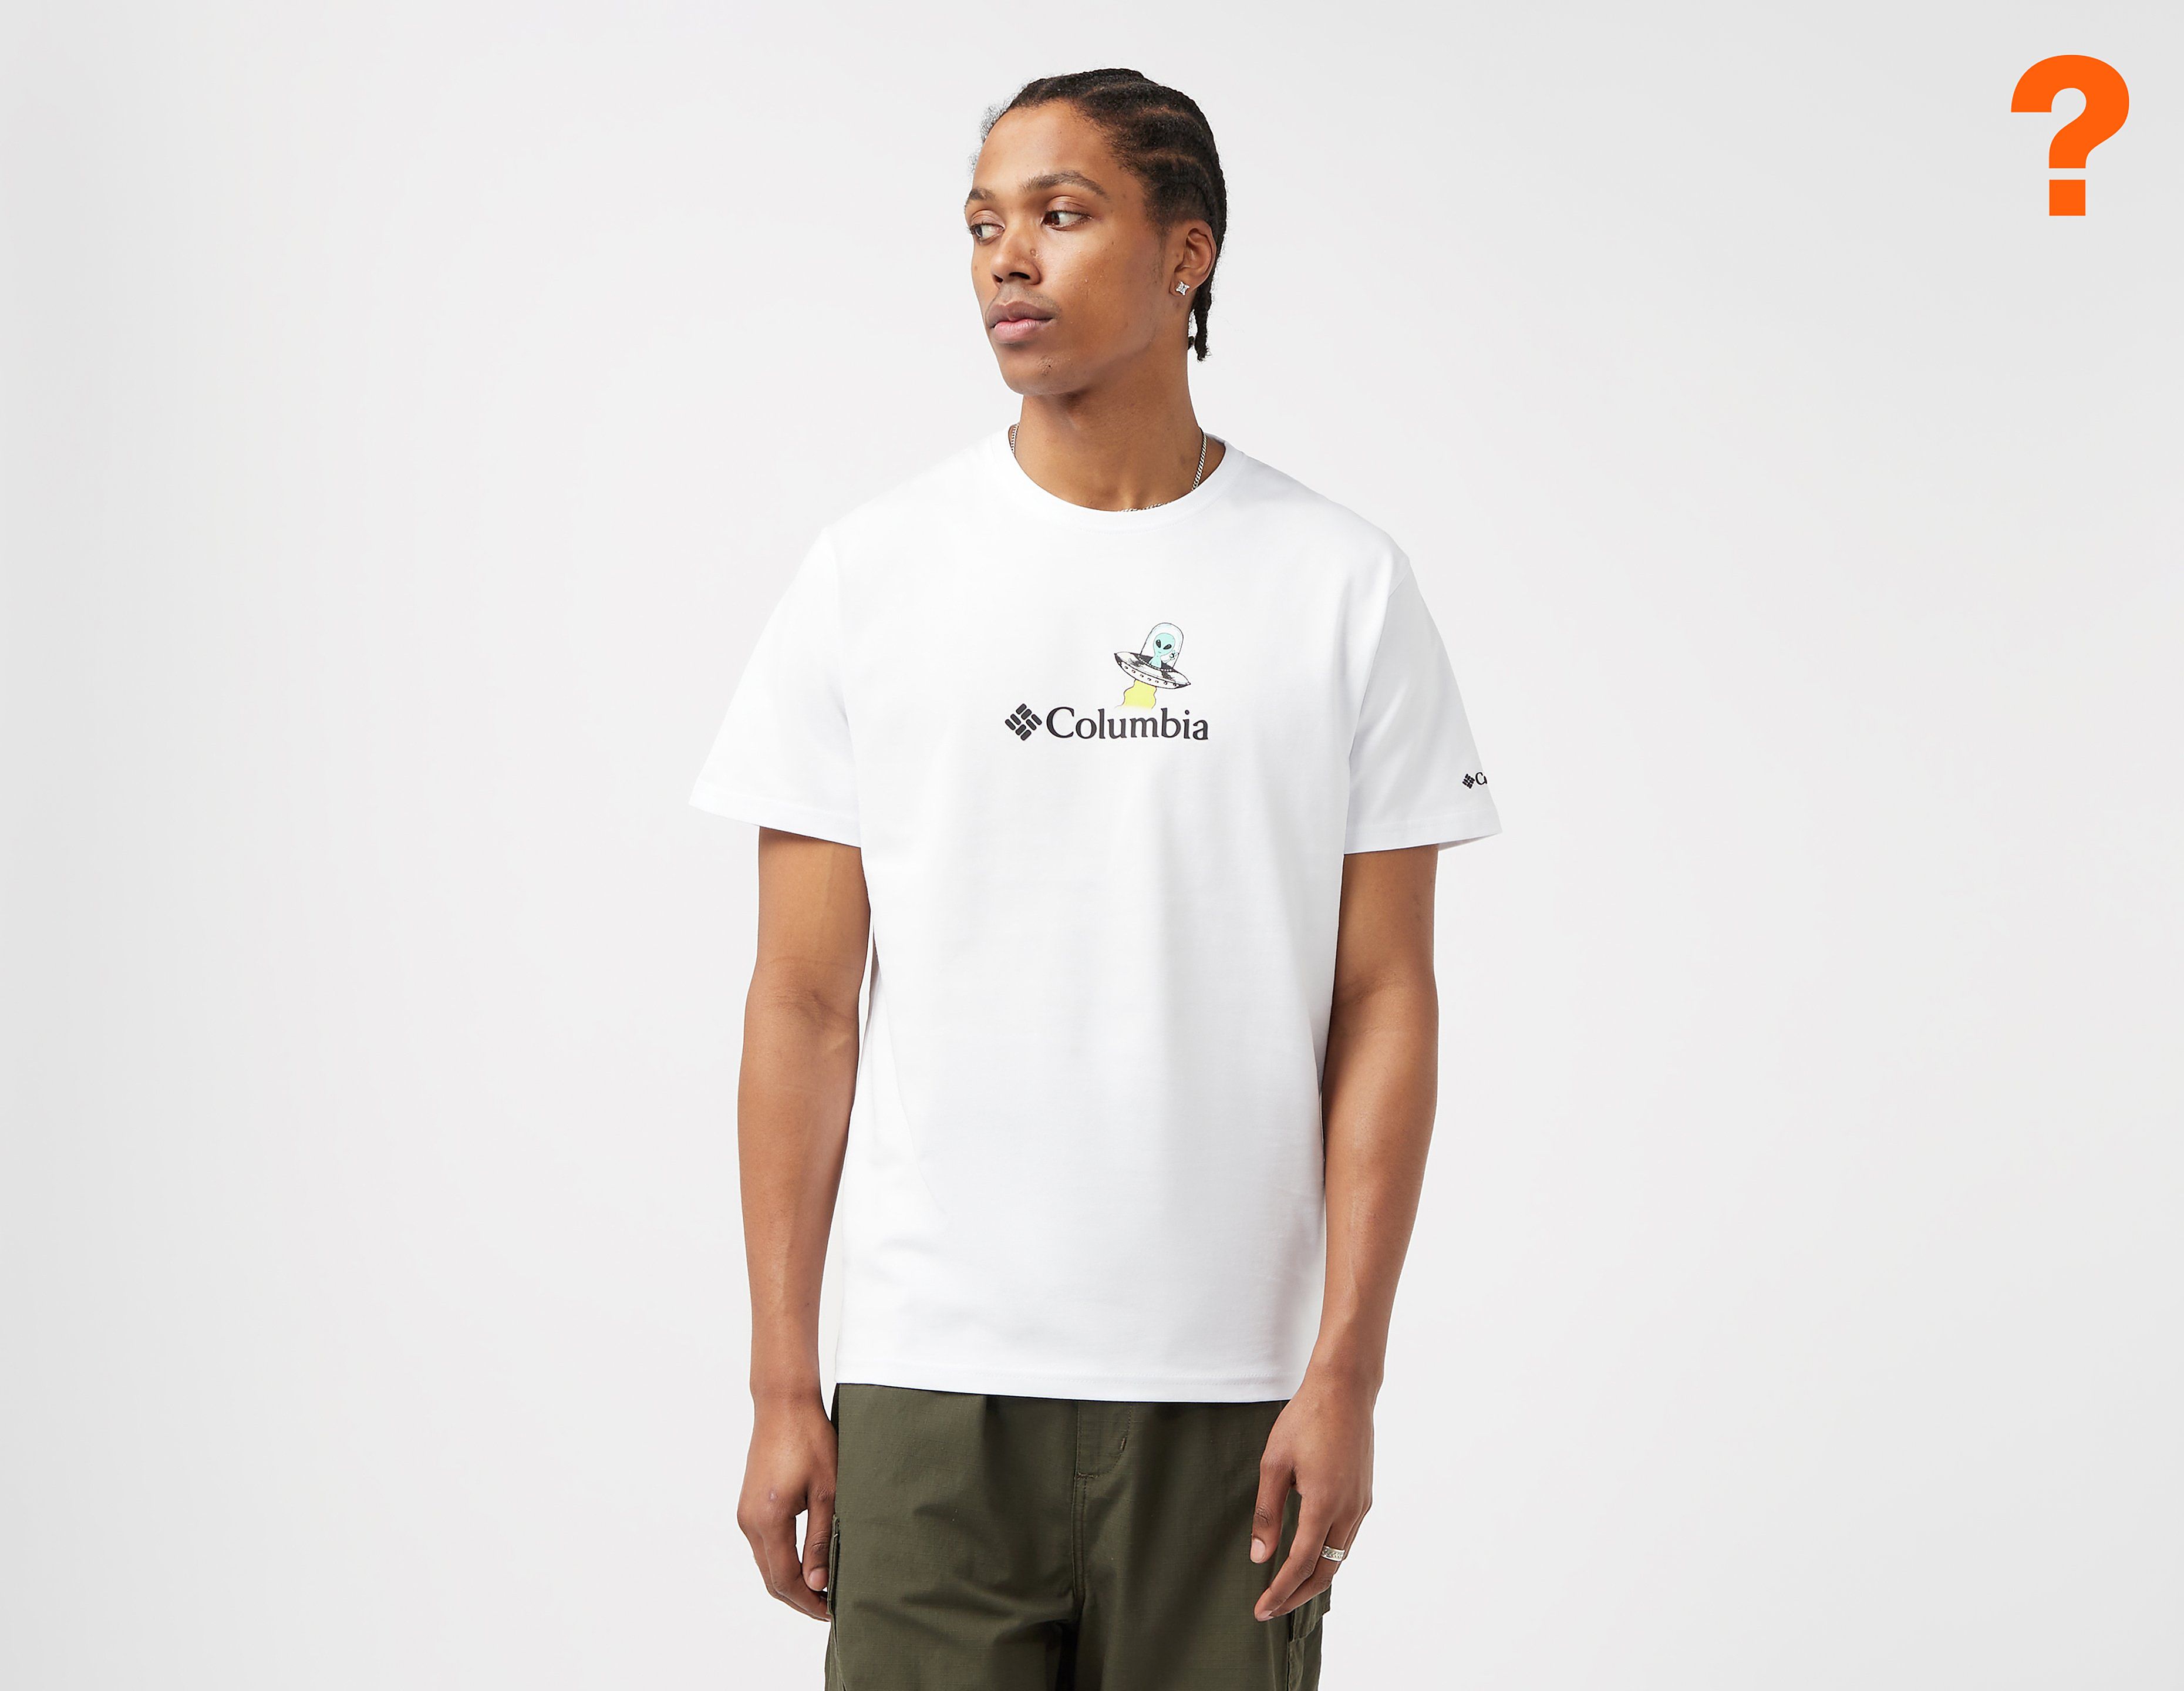 Columbia Outer Space T-Shirt - size? exclusive, White